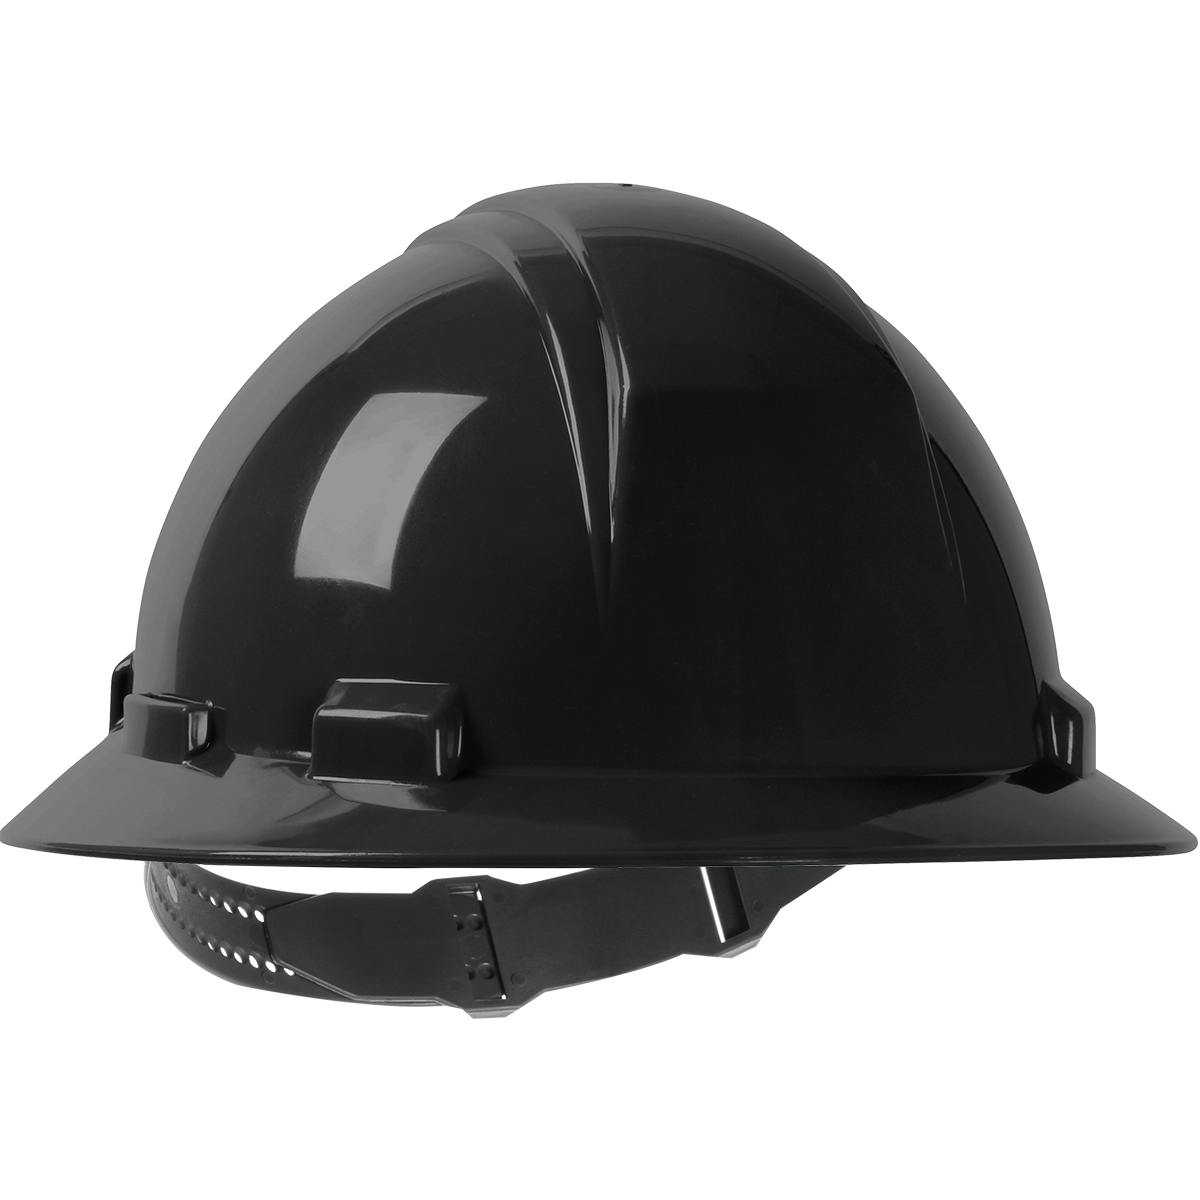 Kilimanjaro™ Full Brim Hard Hat with HDPE Shell, 4-Point Textile Suspension and Pin-Lock Adjustment (280-HP641)